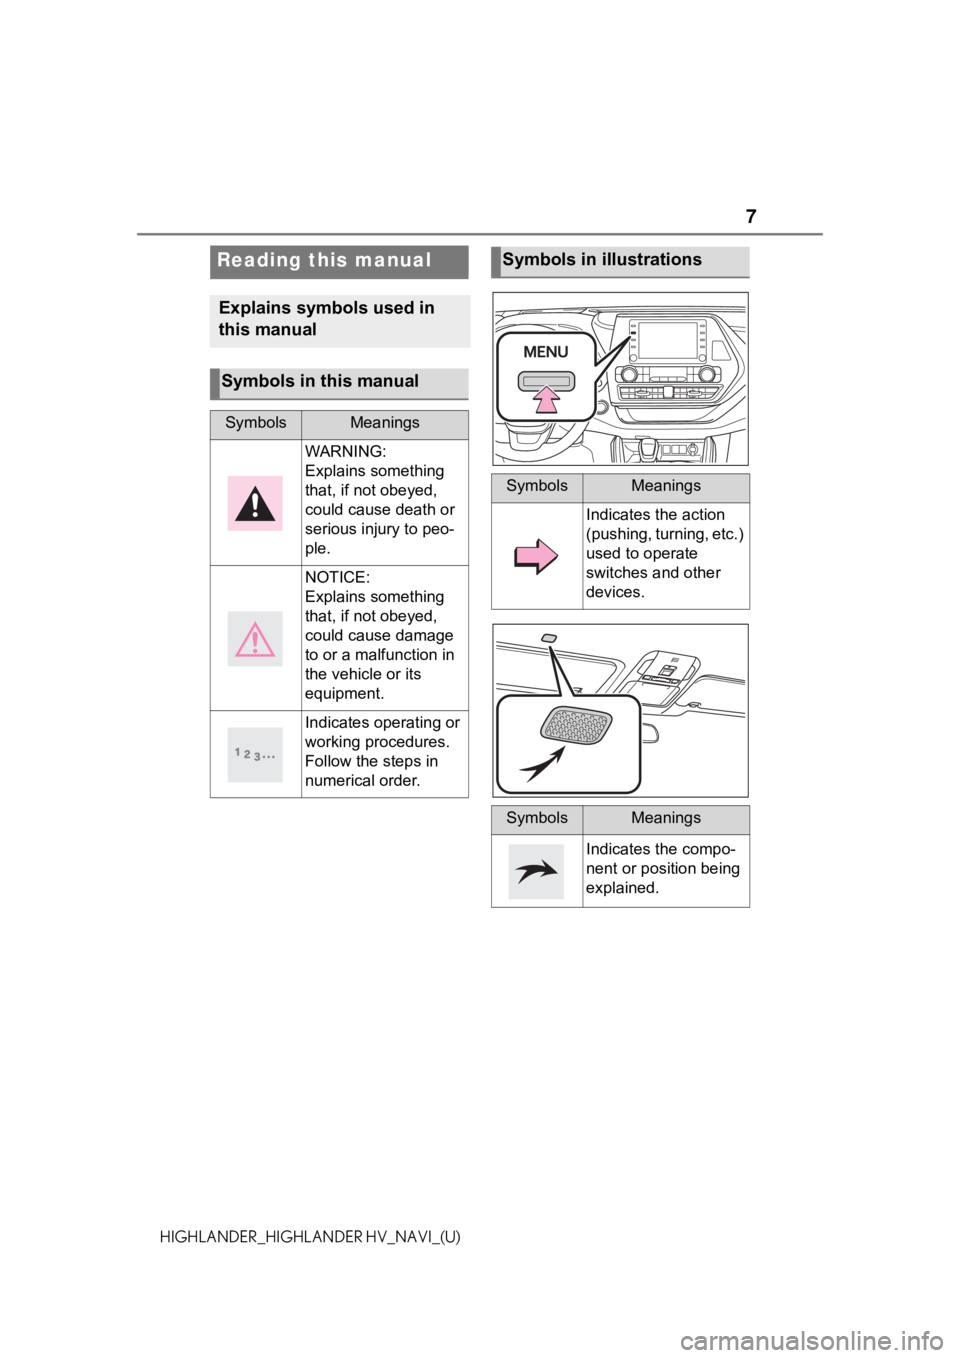 TOYOTA HIGHLANDER 2021  Accessories, Audio & Navigation (in English) 7
HIGHLANDER_HIGHLANDER HV_NAVI_(U)
Reading this manual
Explains symbols used in 
this manual
Symbols in this manual
SymbolsMeanings
WARNING:
Explains something 
that, if not obeyed, 
could cause deat